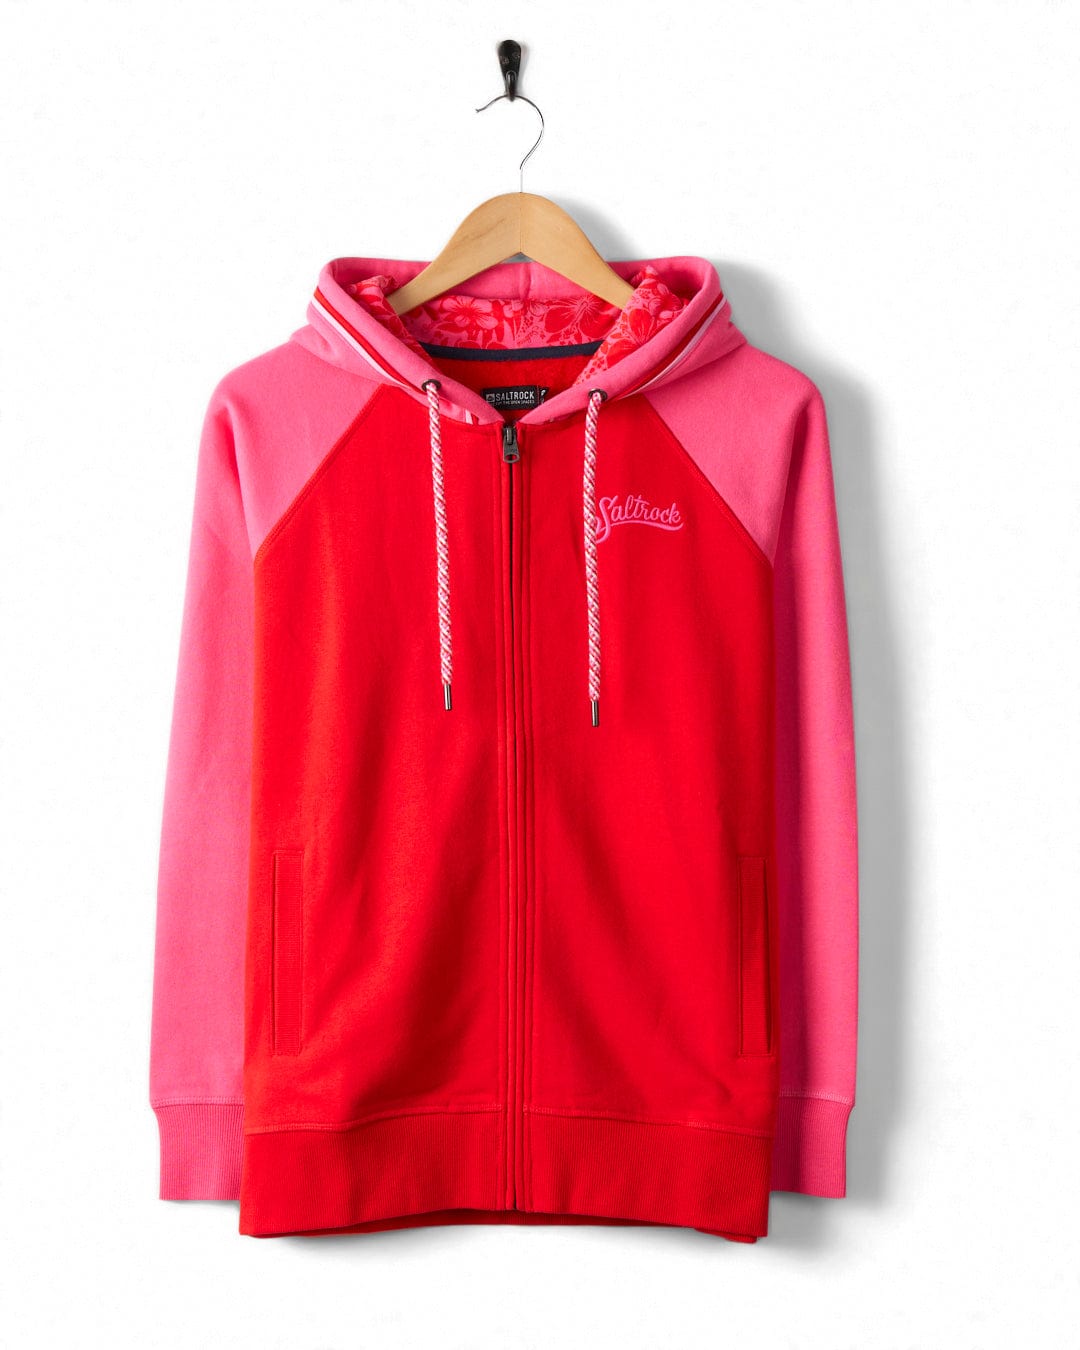 A Tropic - Womens Zip Hoodie - Red with a white Saltrock branding embroidered on the chest and white drawstrings, hanging from a black hook.